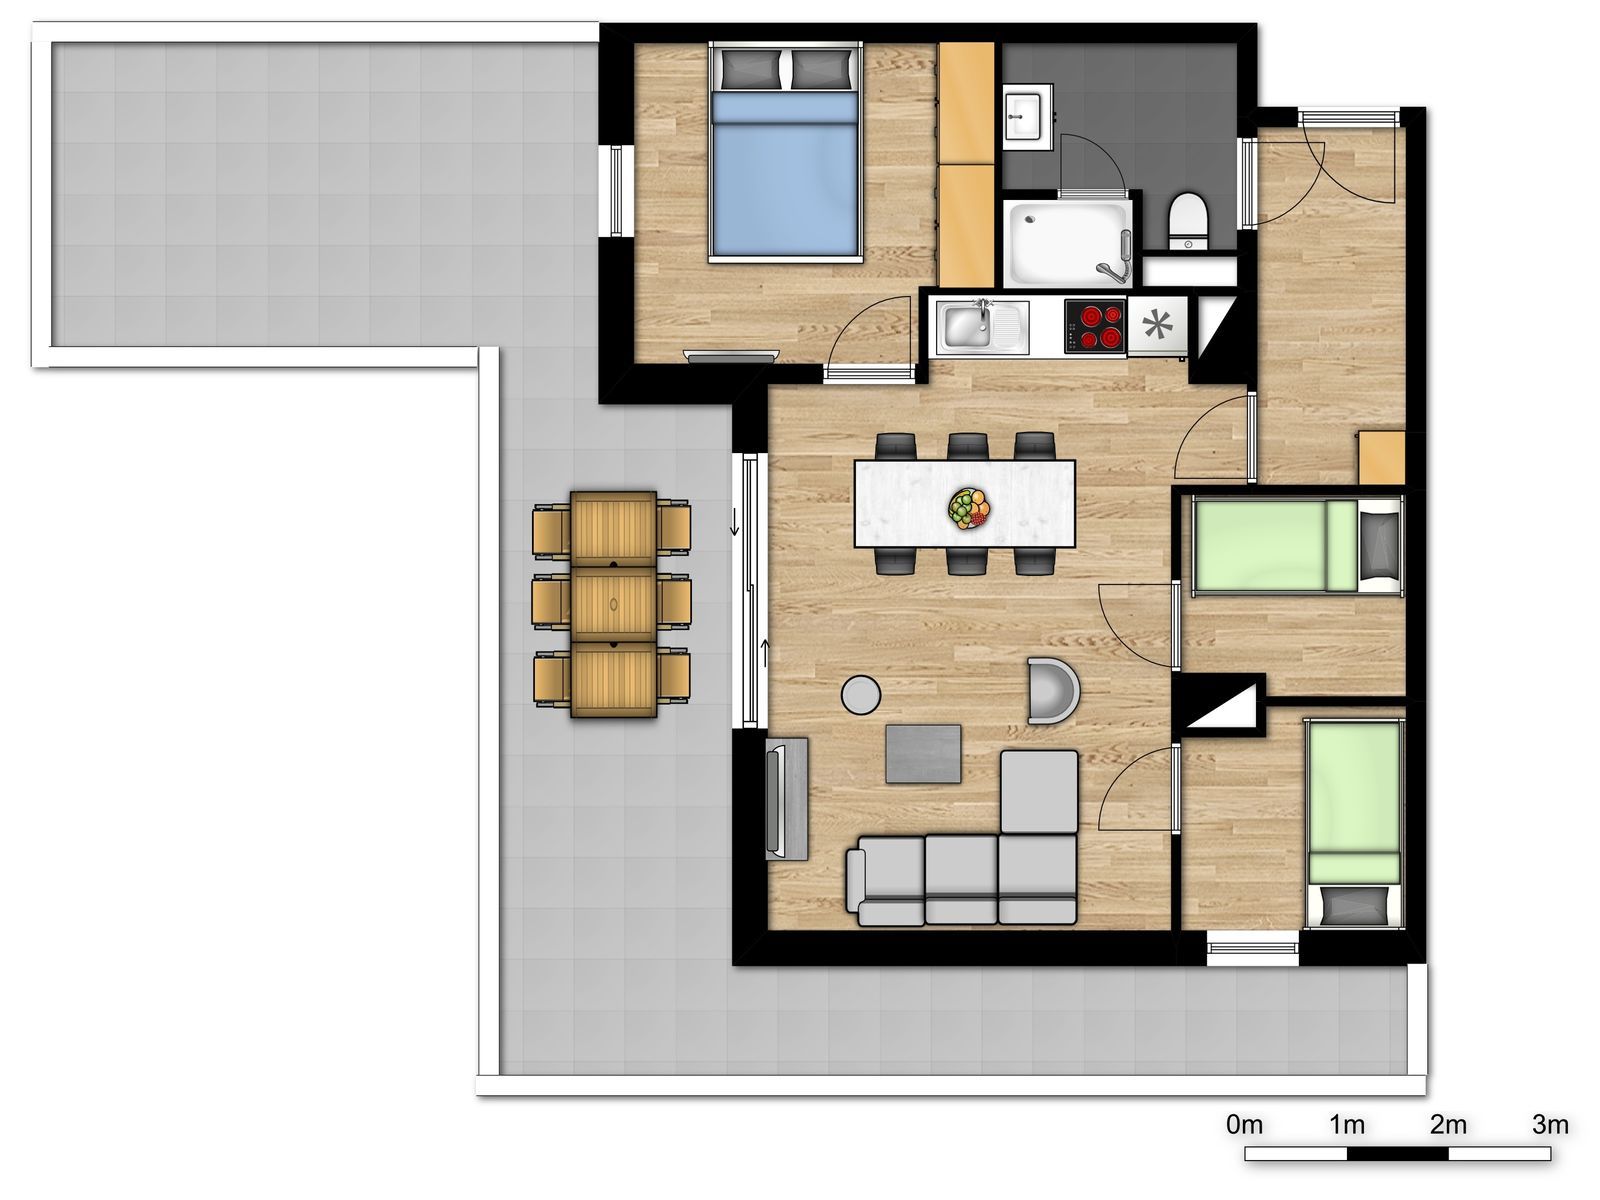 New family penthouse for 6 people with 2 bunk beds